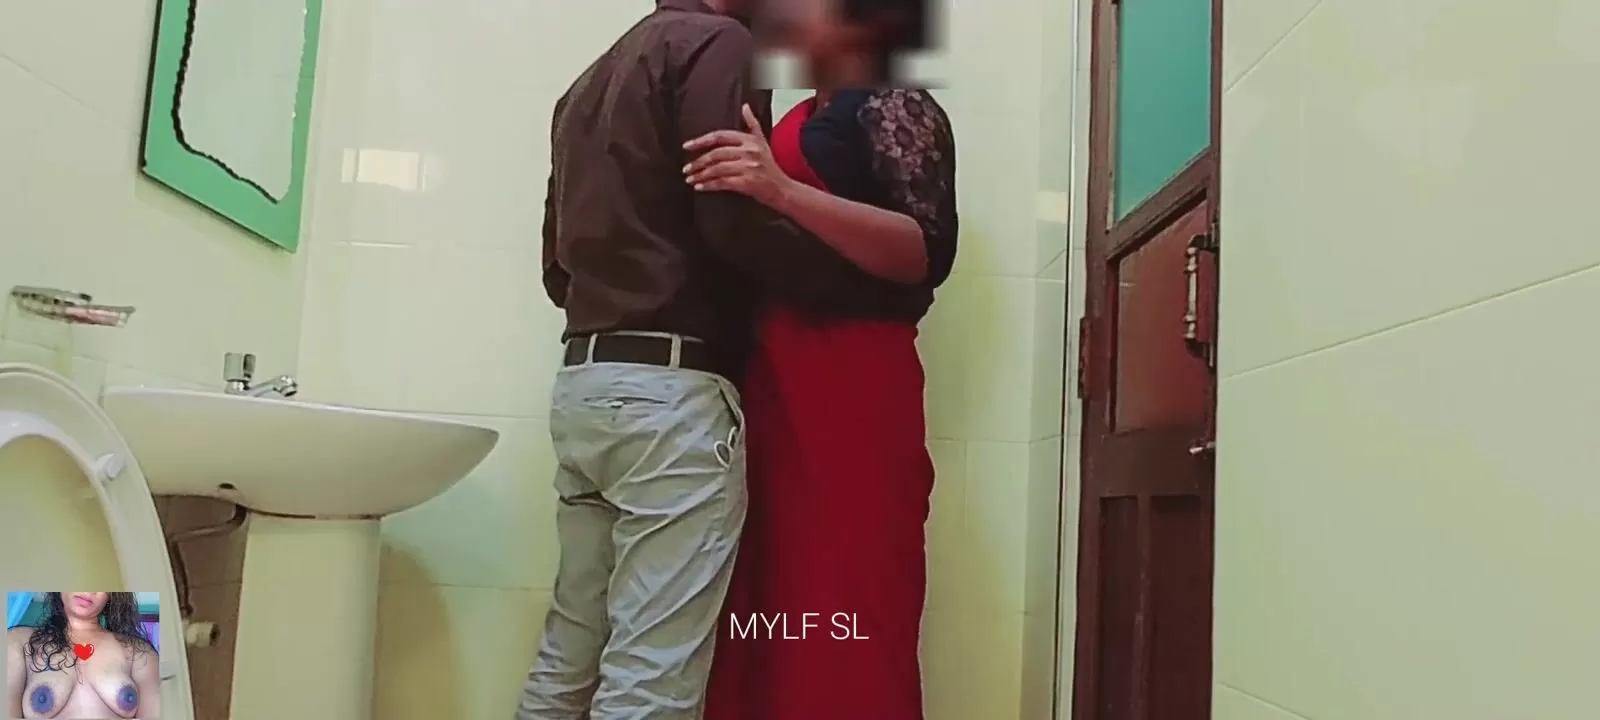 Boss had sex inside the office bathroom with Hot Milf watch online pic picture